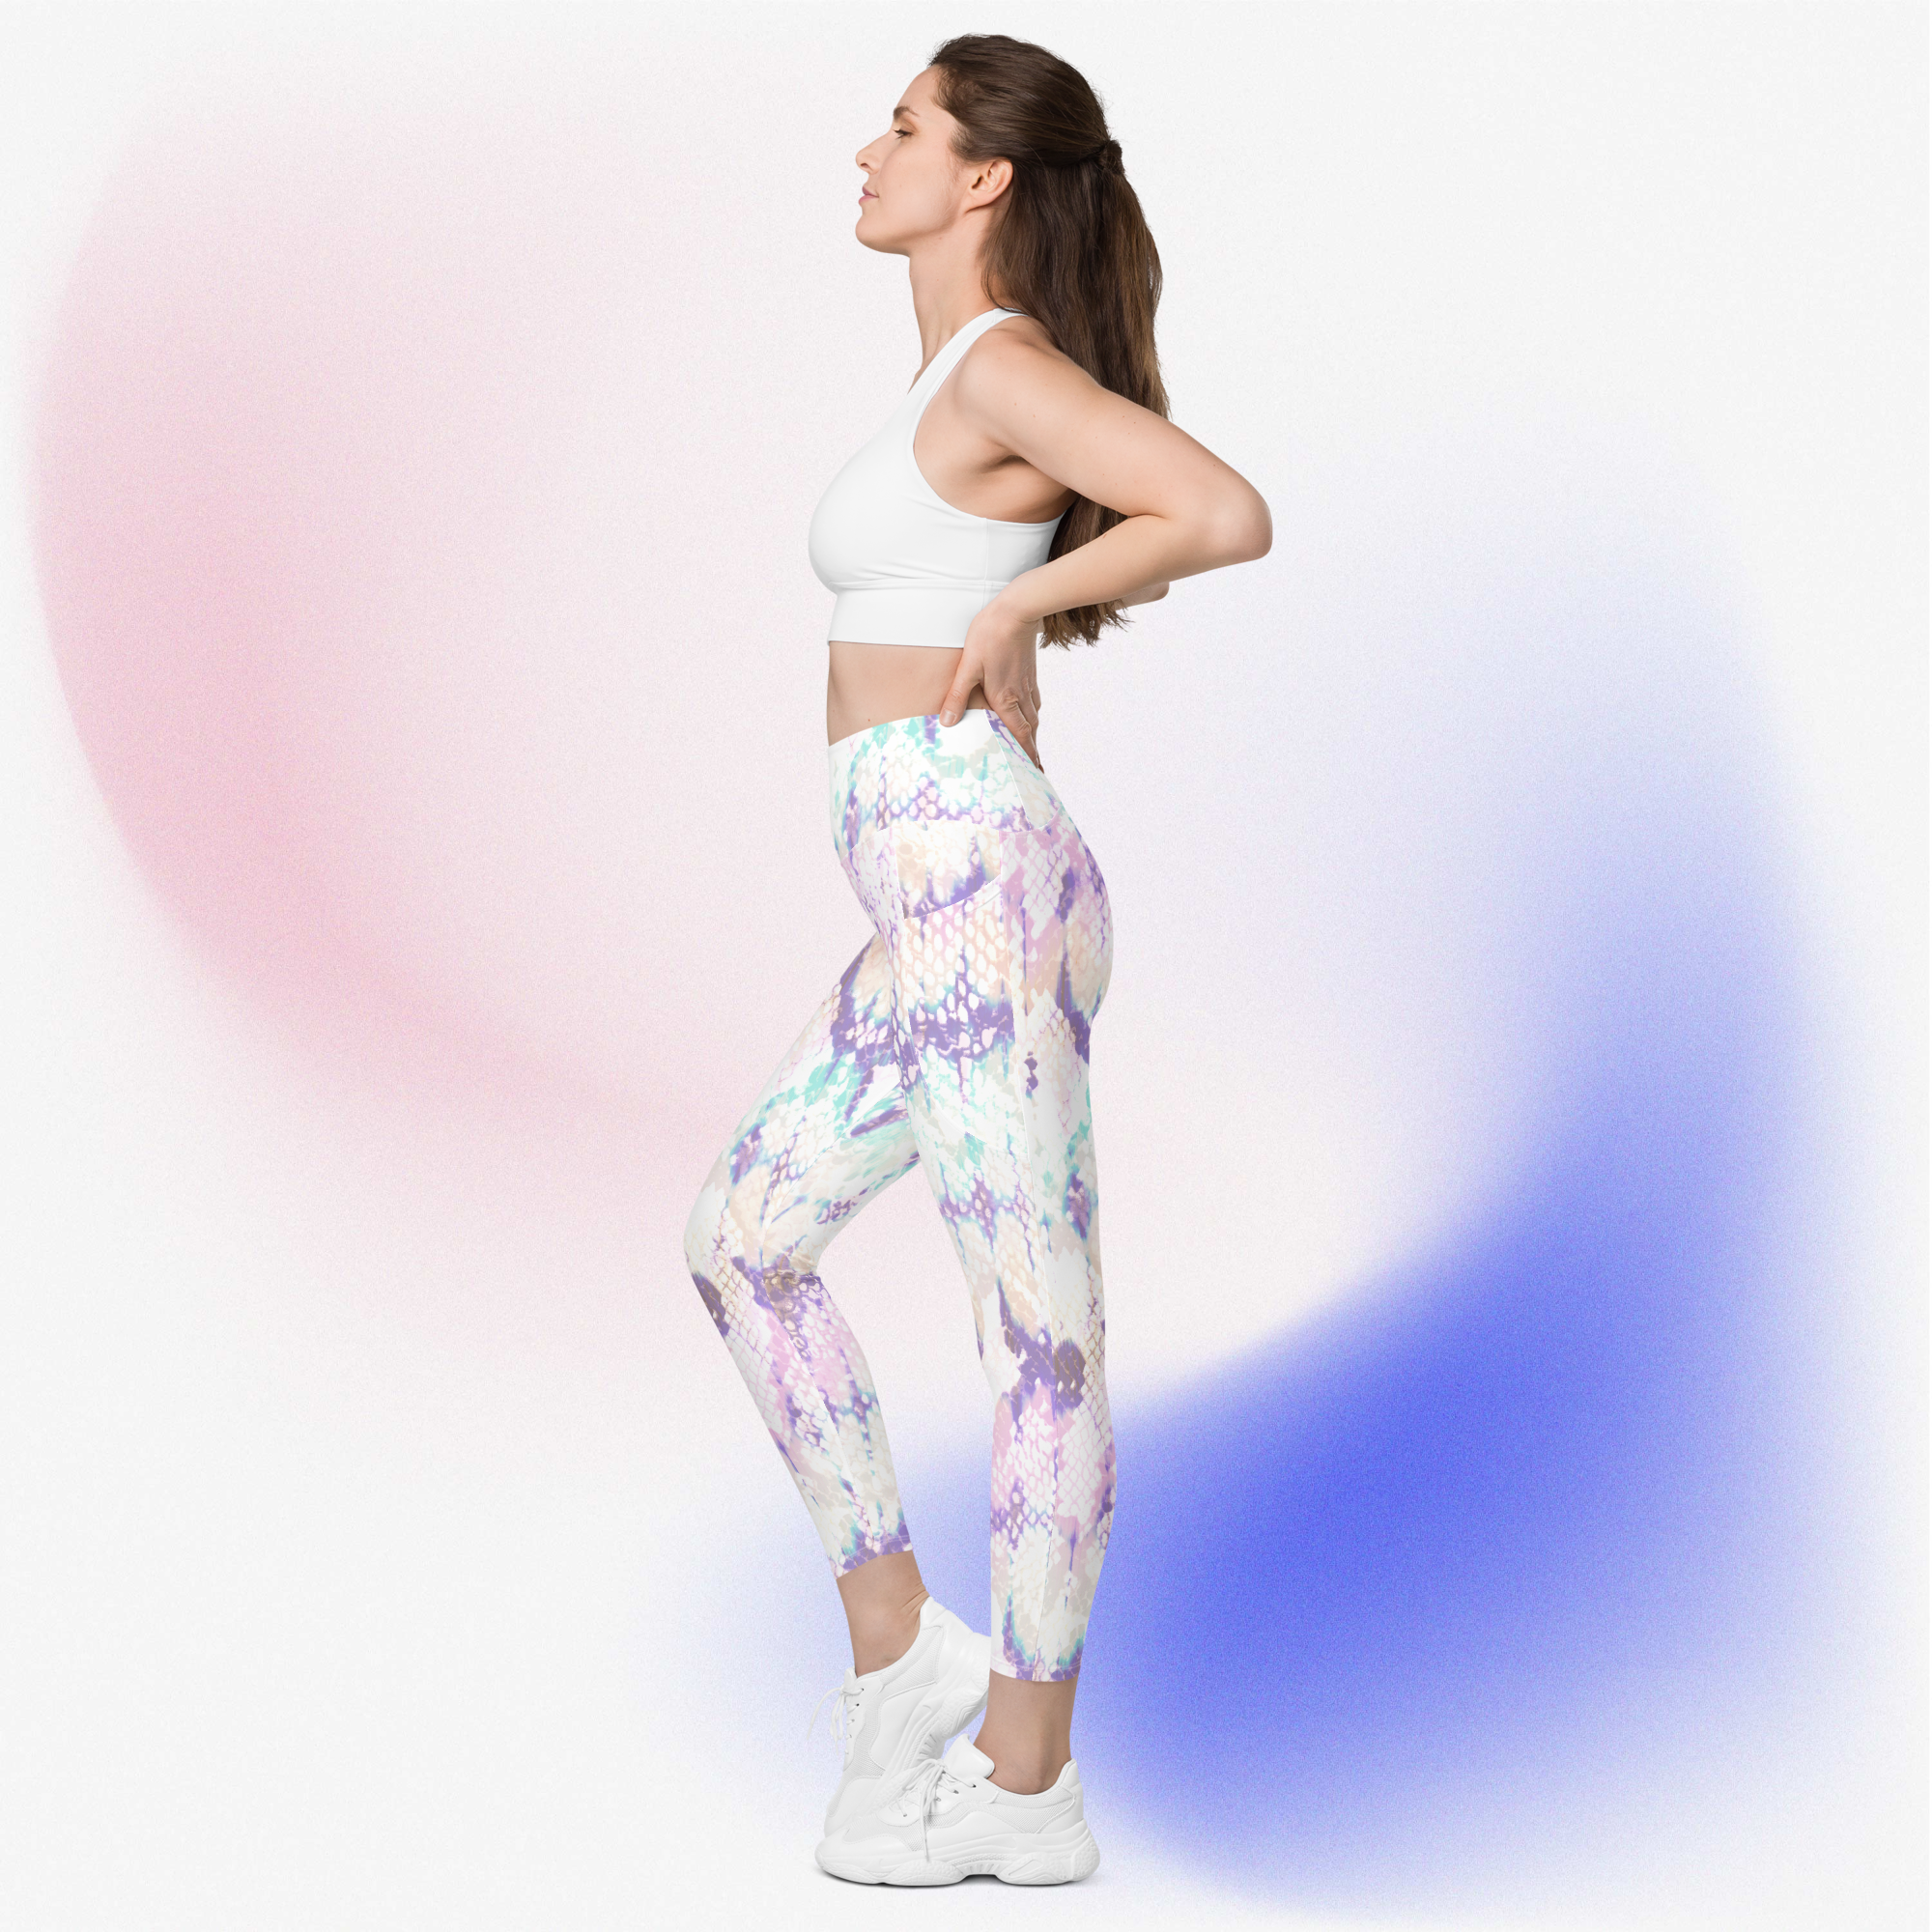 Just Dropped! Chakra 7 Leggings with pockets